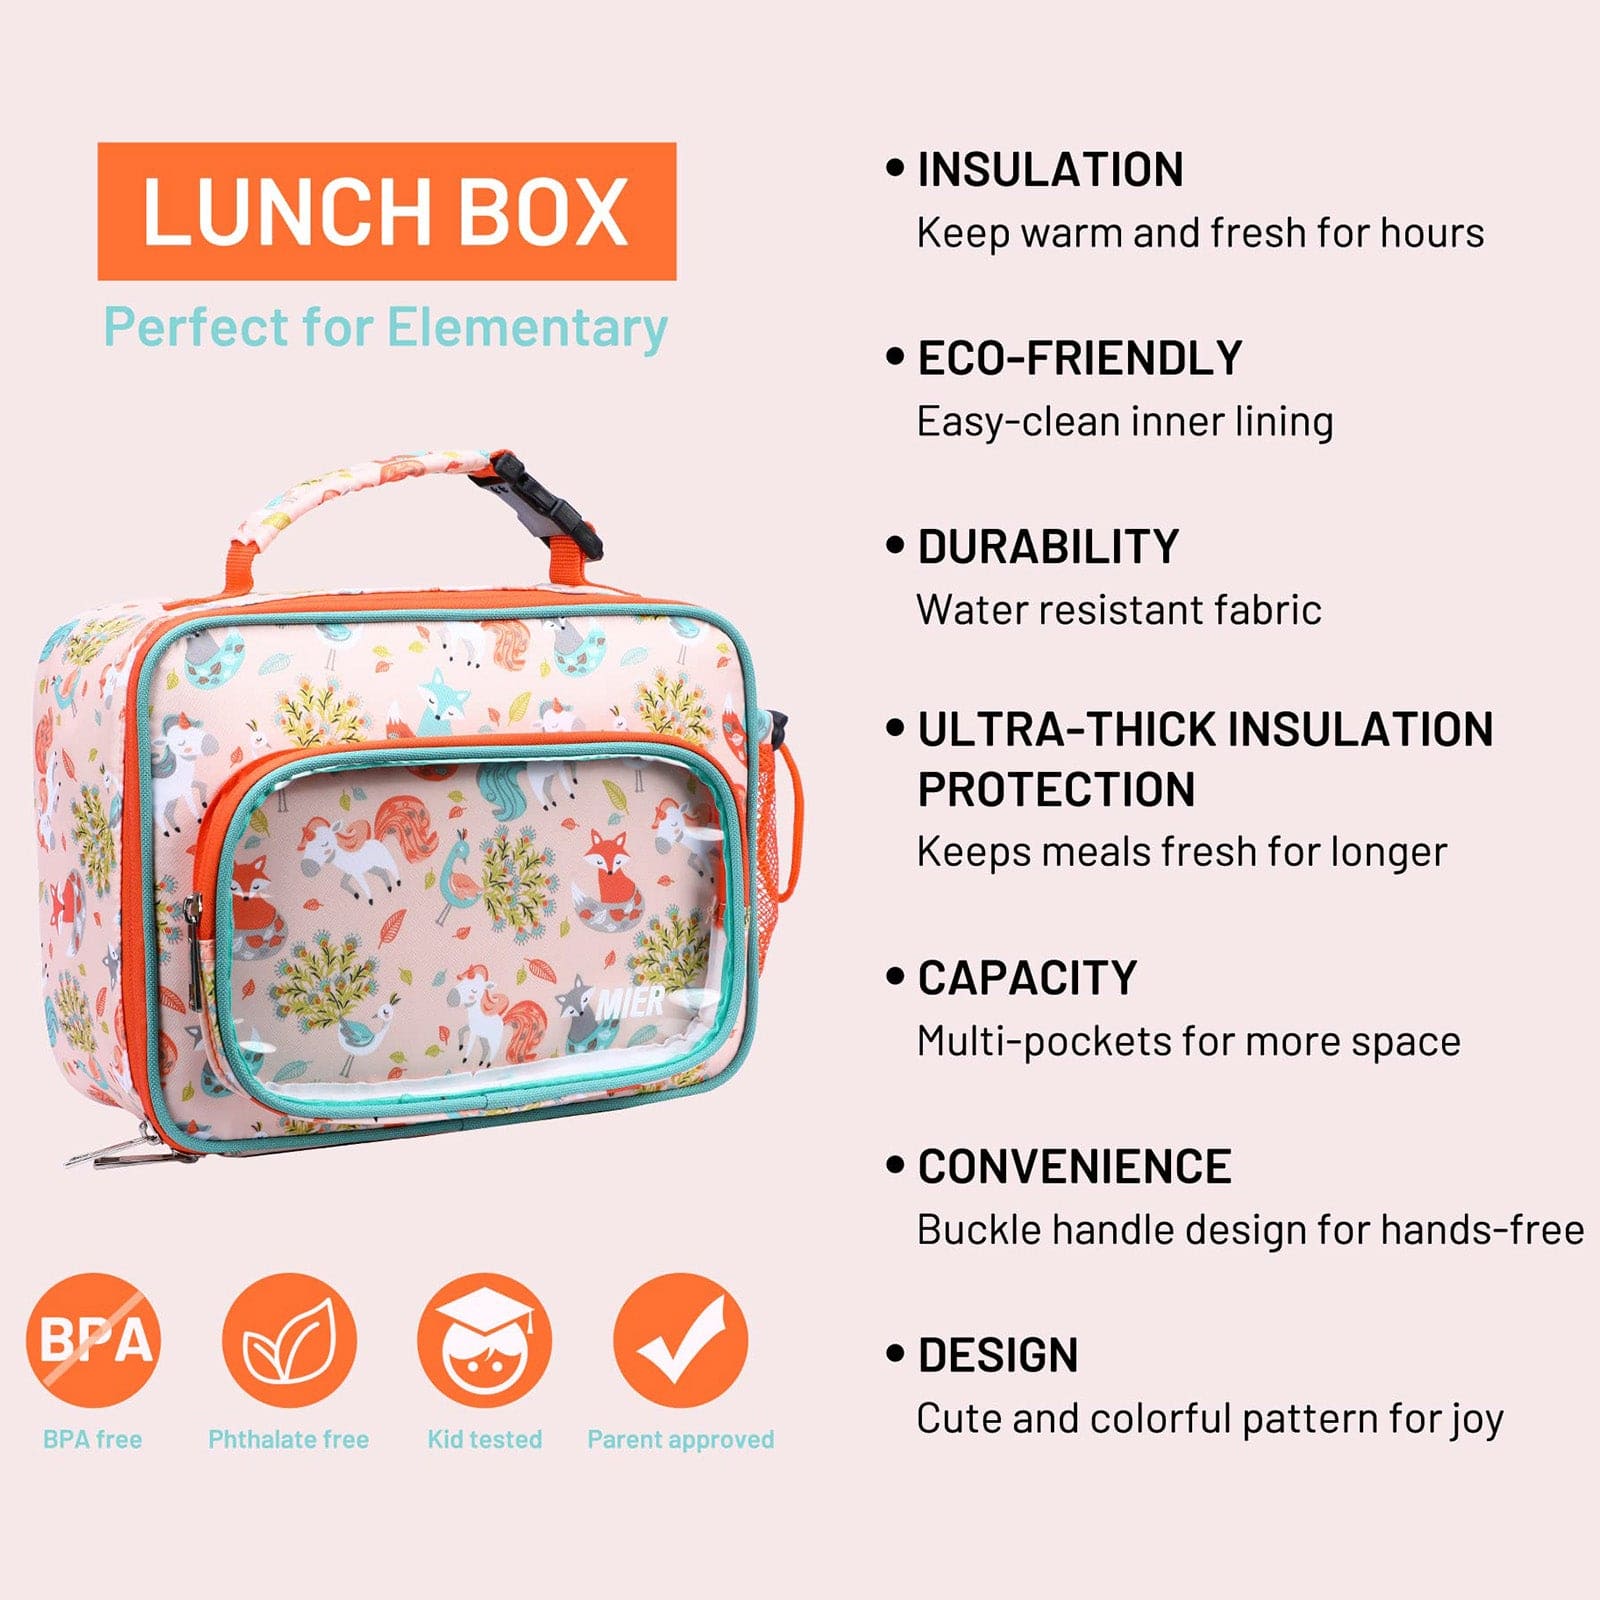 Petit sac isotherme  Guide pour le choisir + Top 10 – Bee lunch